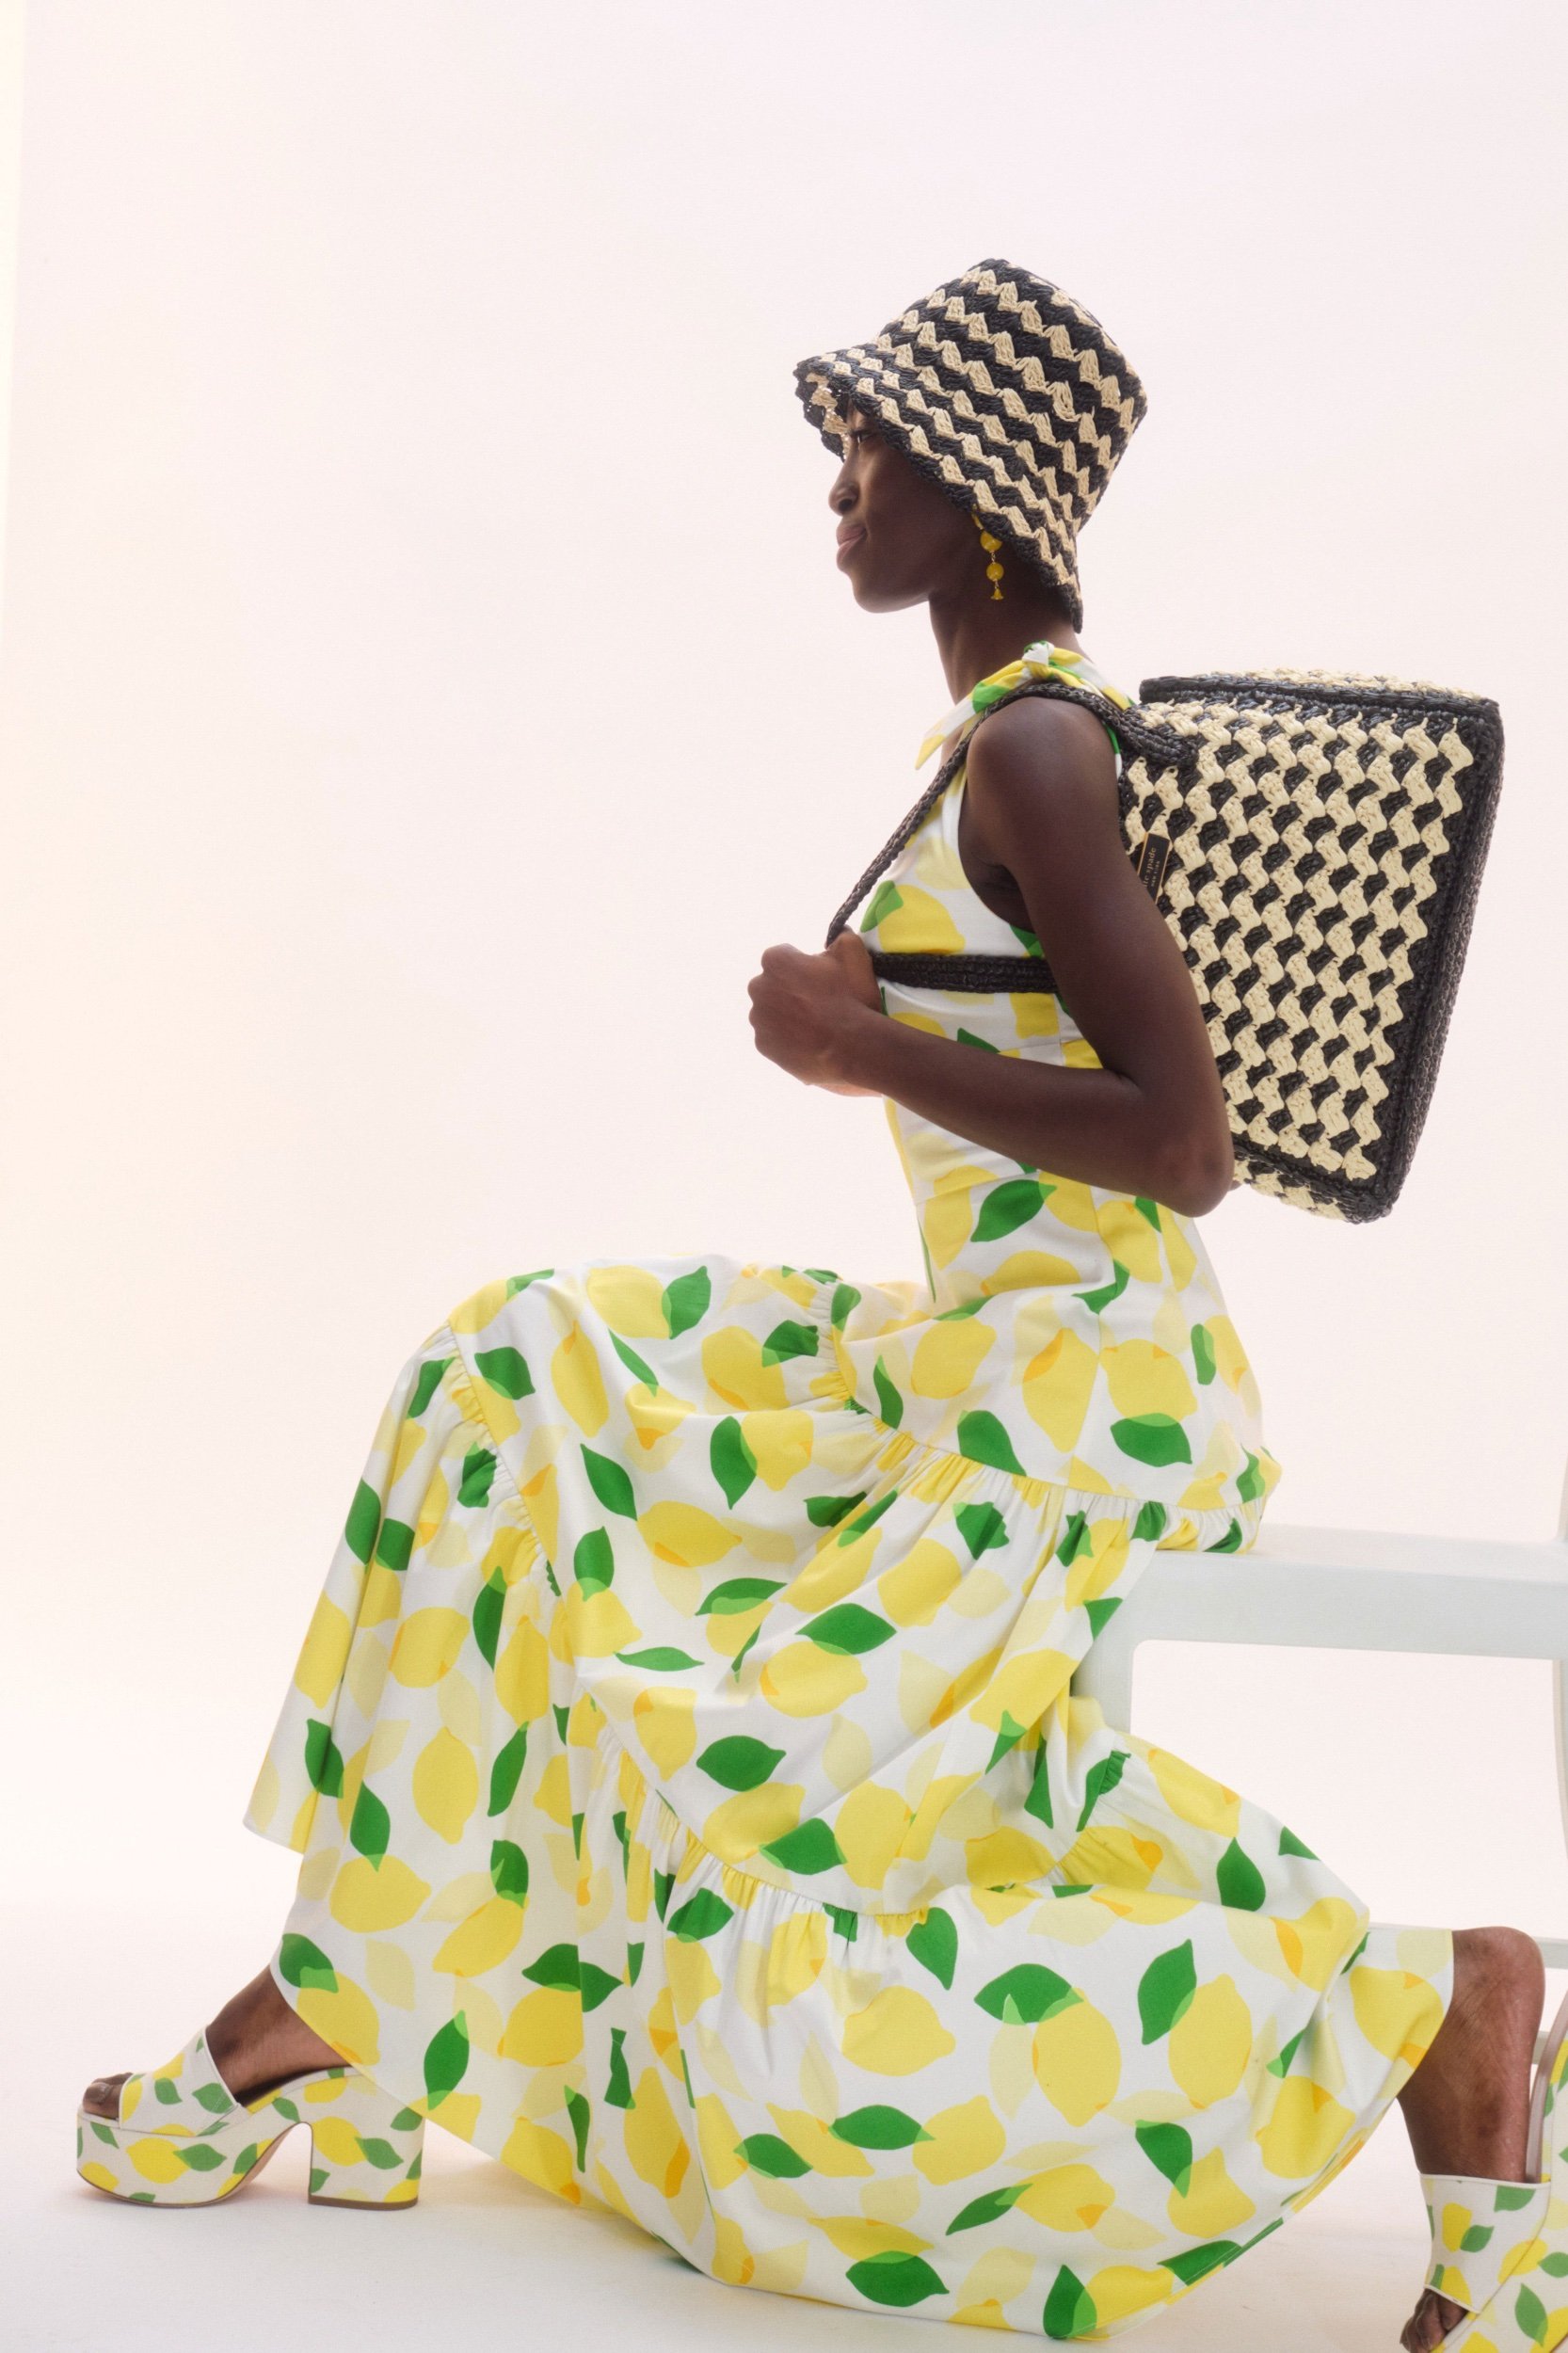 Kate Spade New York Resort 2020 Collection